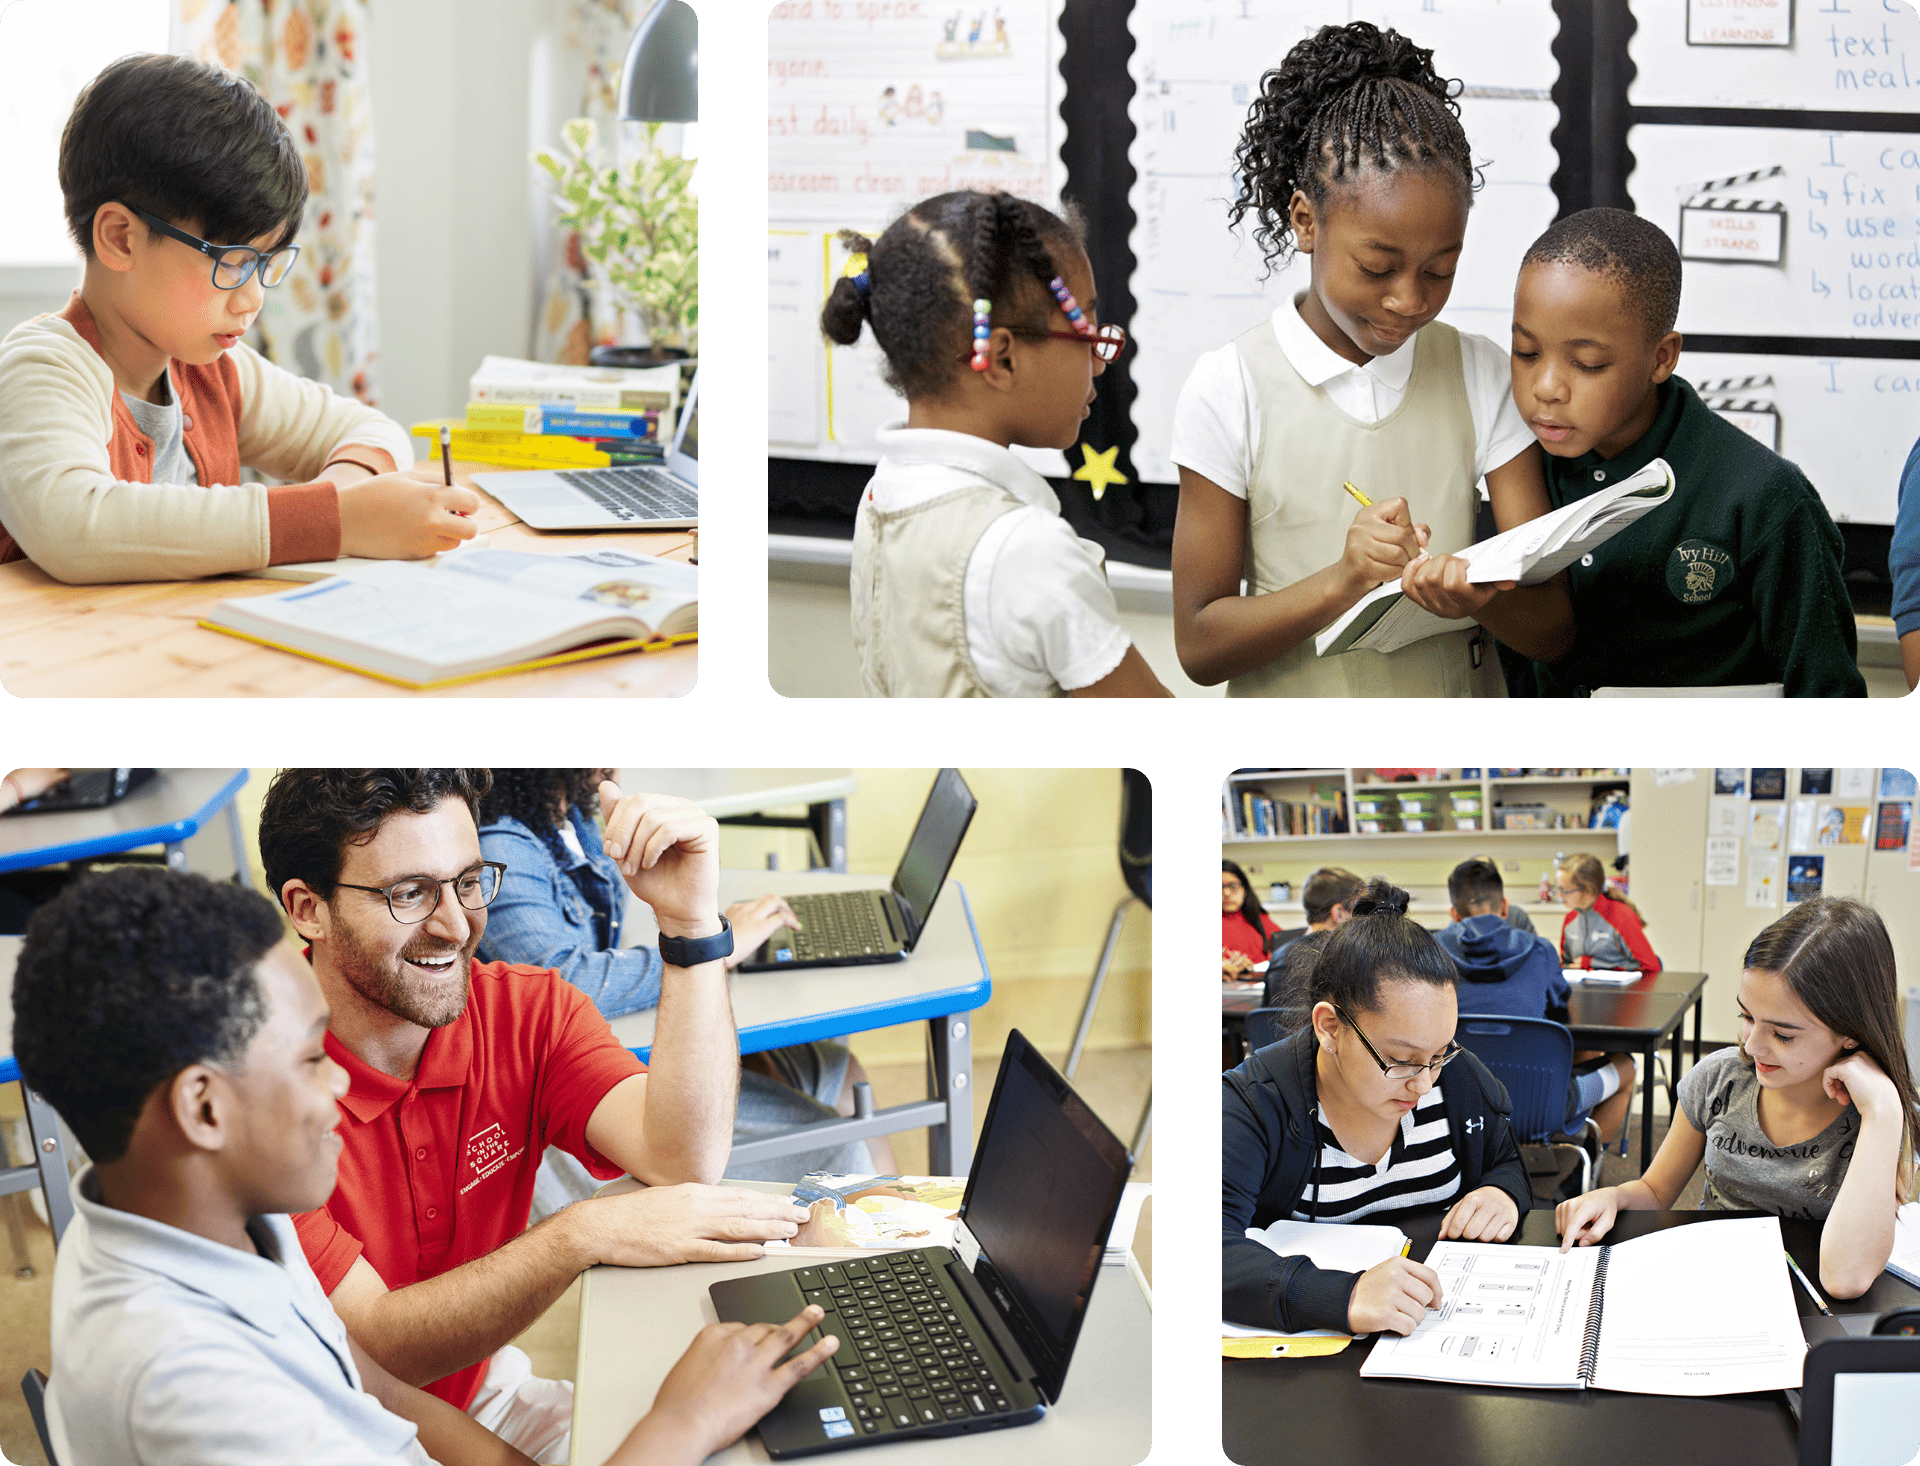 Collage of diverse classroom scenes, featuring students and teachers engaged in different educational activities such as reading, using laptops, and discussing.